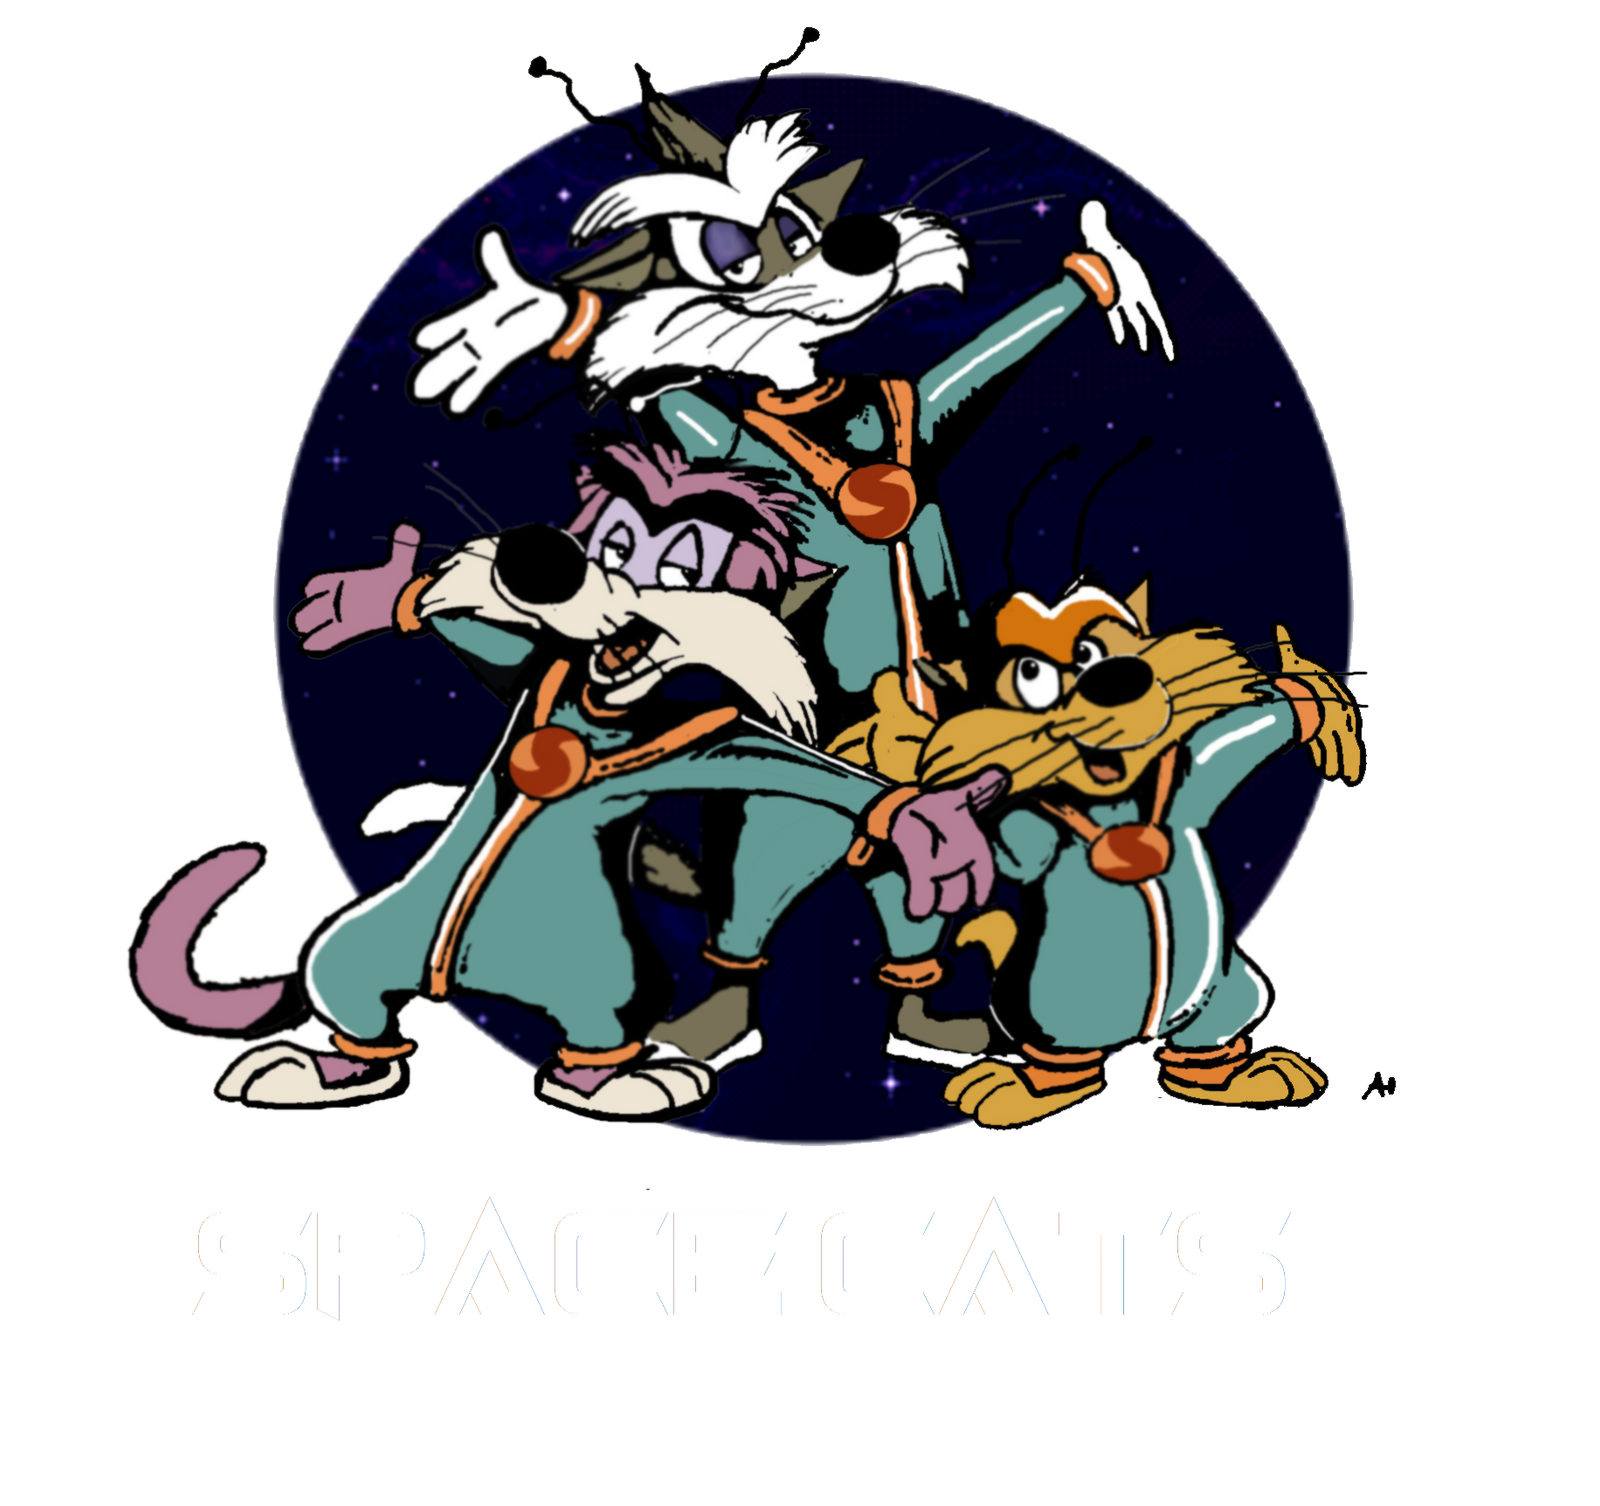 Space Cats (with logo) by FairytalesArtist on DeviantArt